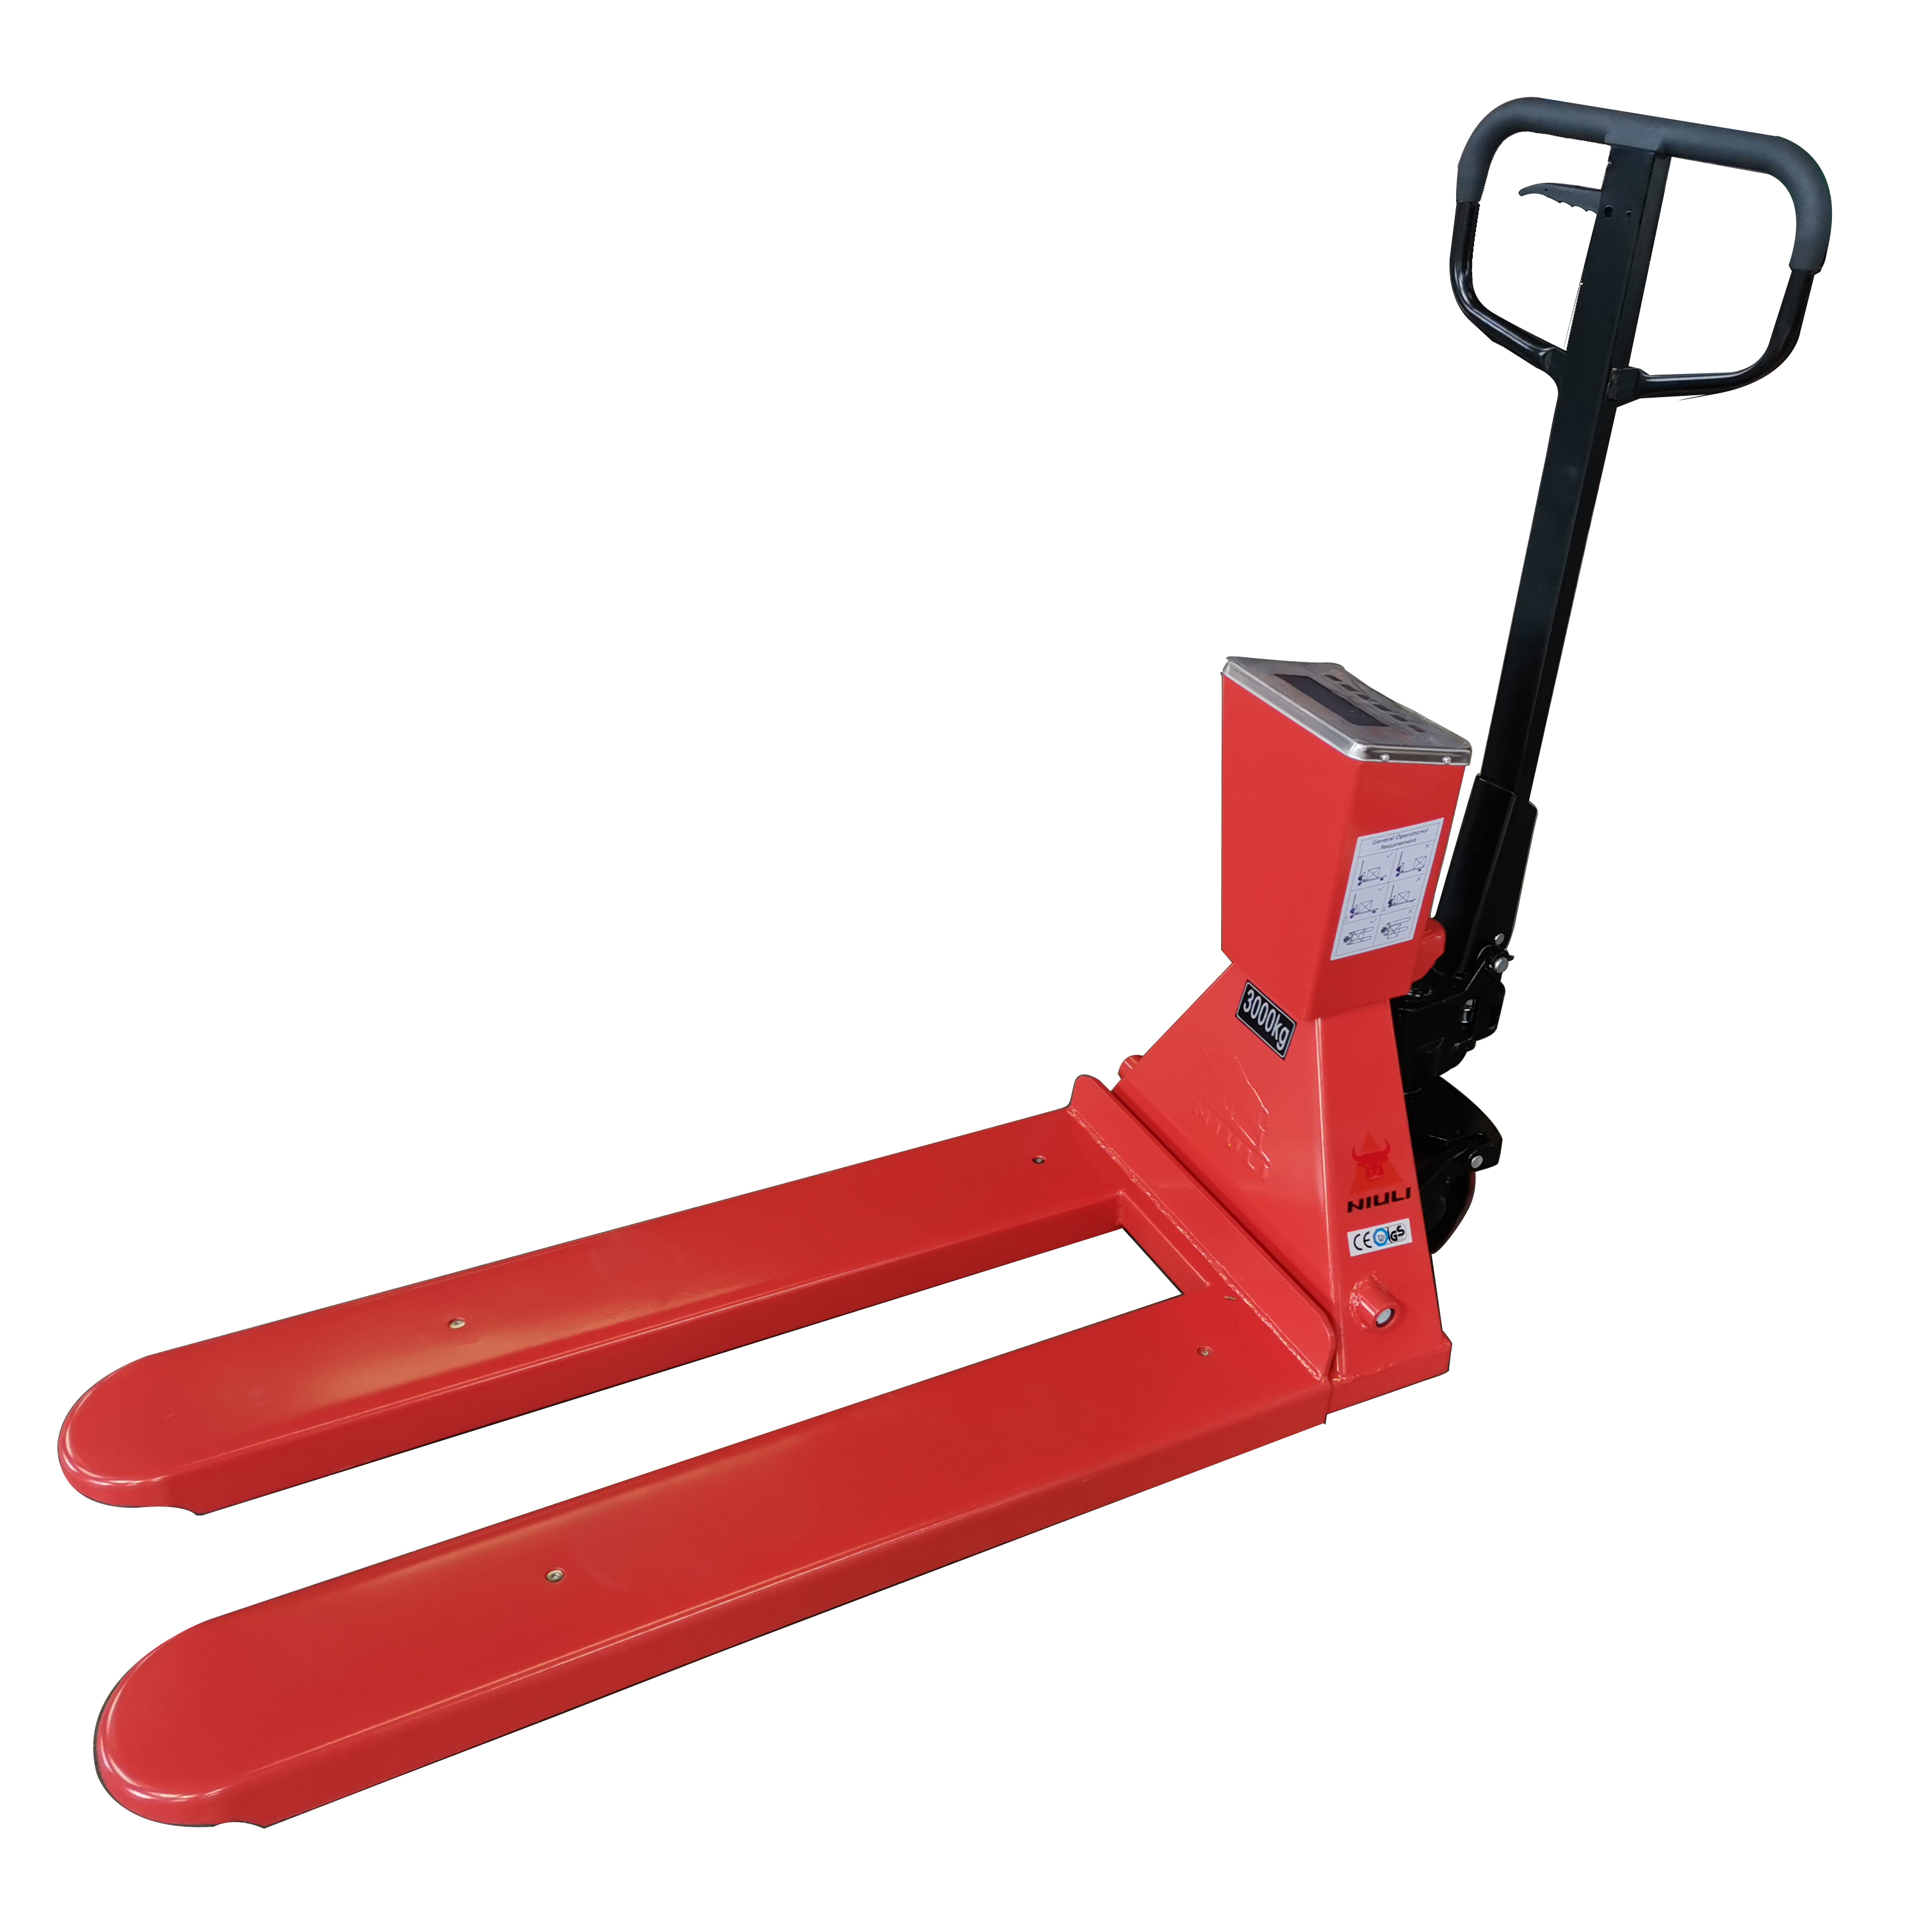 NIULI 3000kg 3 Ton Electronic Forklift Weighing Scale Pallet Jack Scale Hand Pallet Truck with Weigh Scale